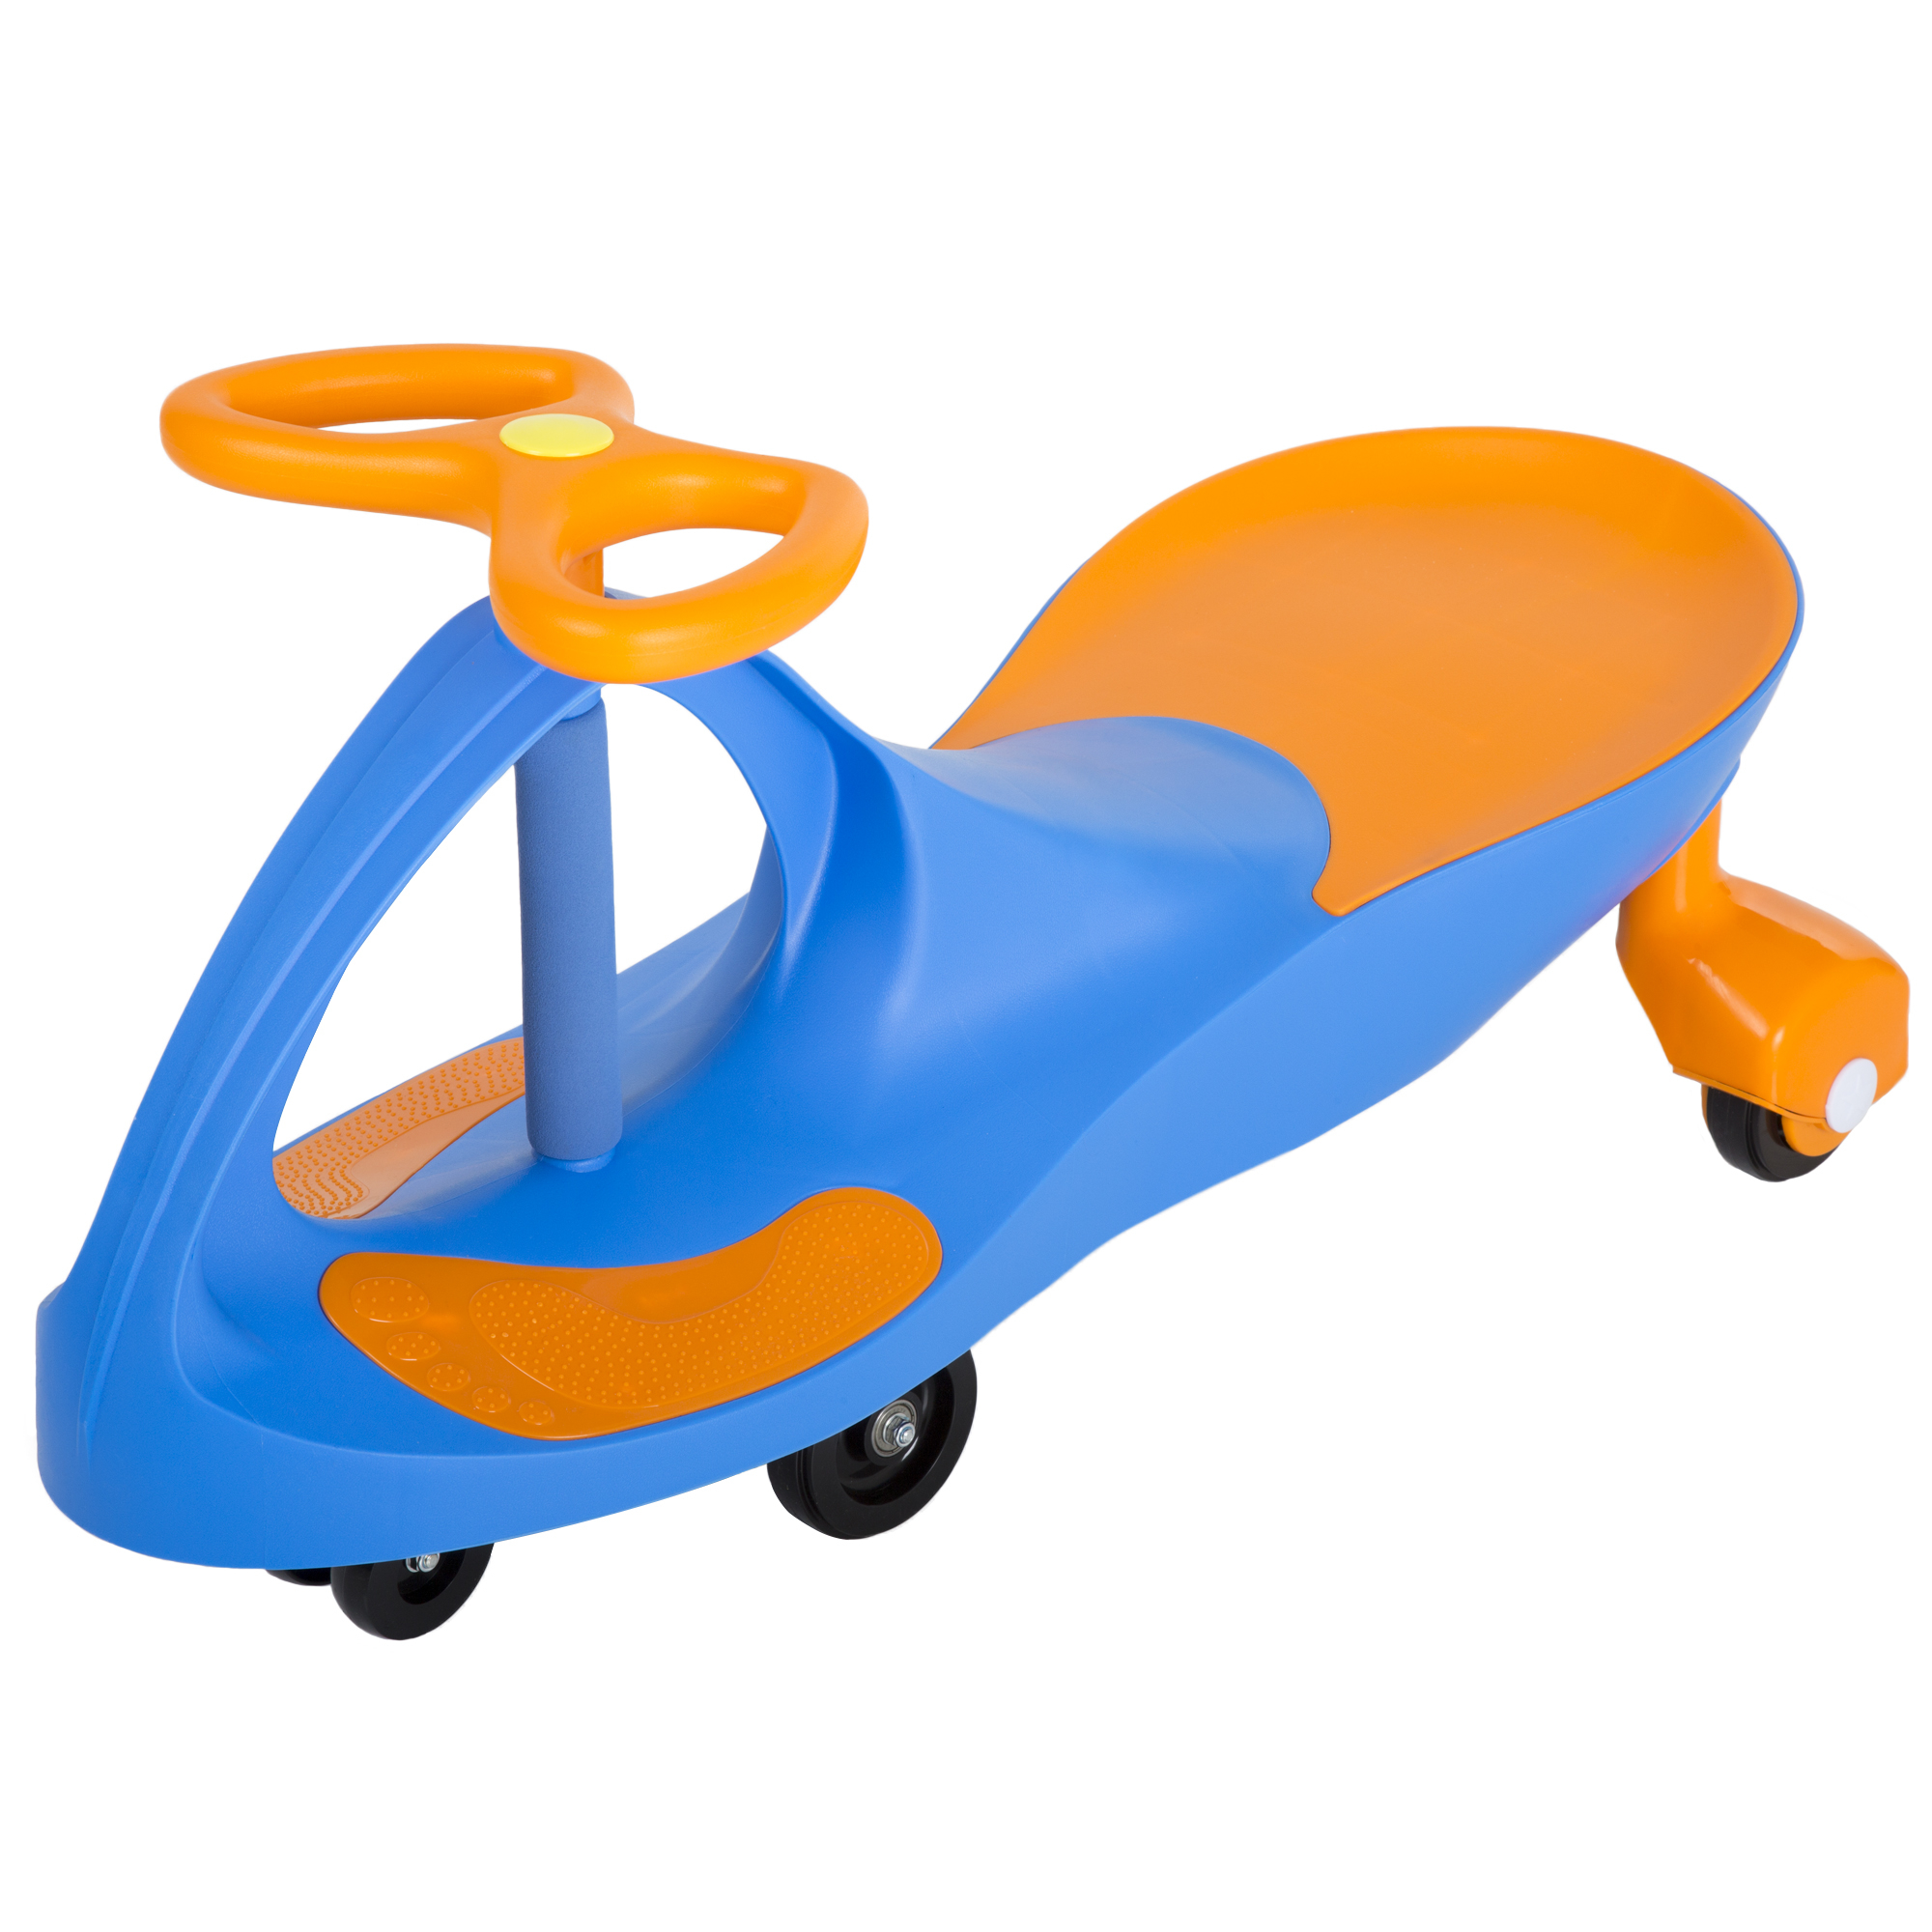 Colorful Ride On Toy Wiggling Ride On Toy For Girls Boys 2-6 Yrs Old Roller Coaster Twisting Car - Blue-Orange